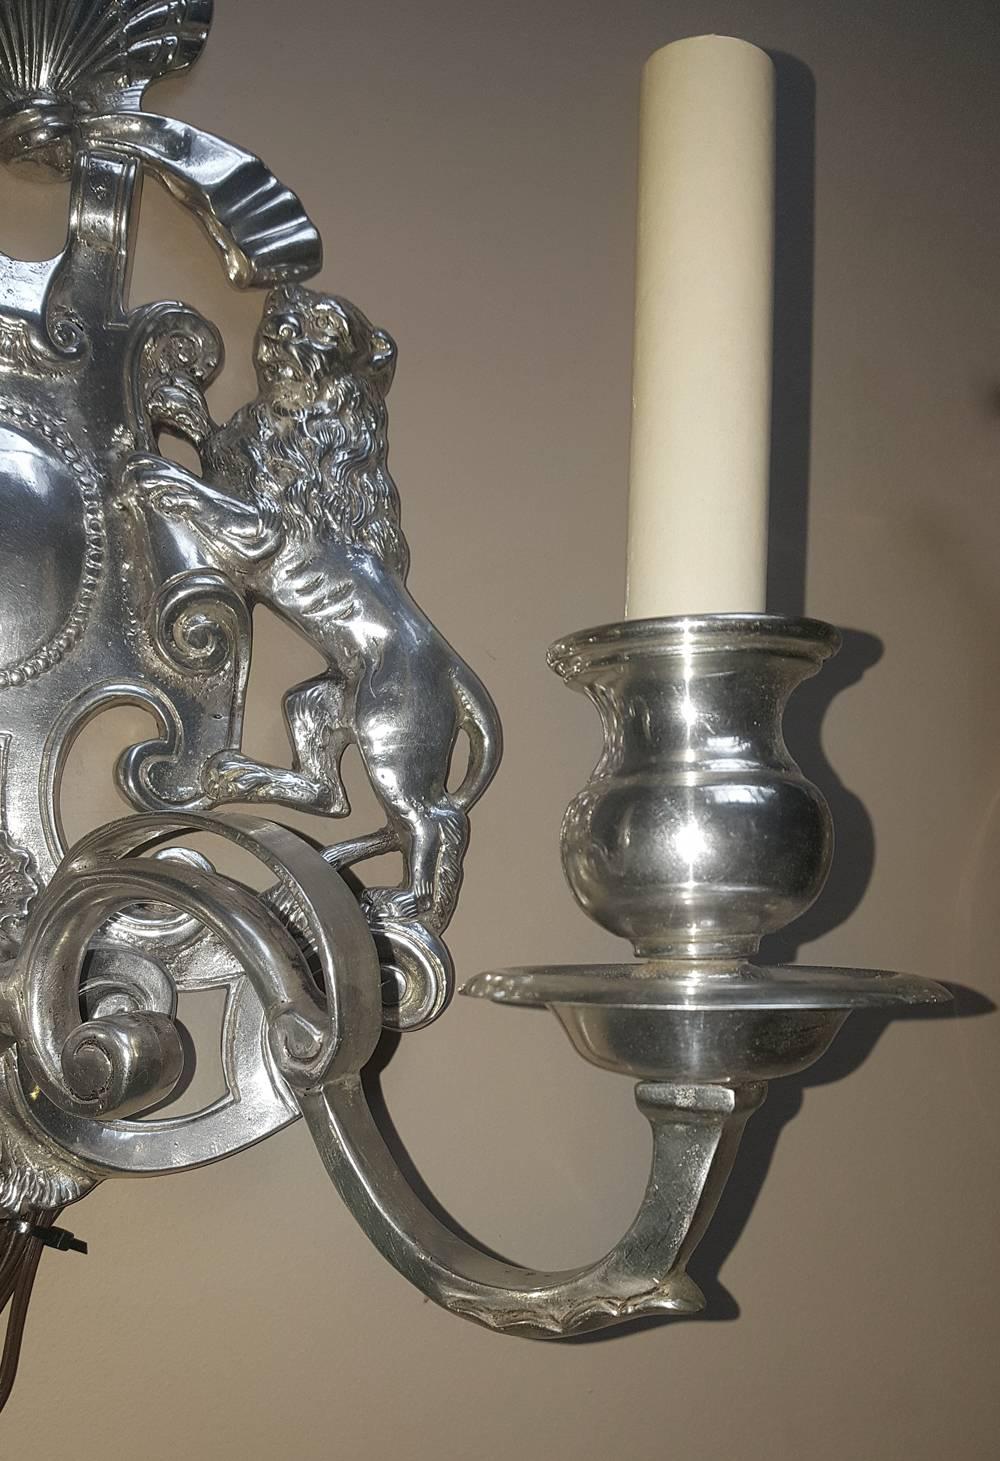 Set of four English silver plated 2-arm neoclassic style sconces with lion and shell motif.
Measurements:
Height 14